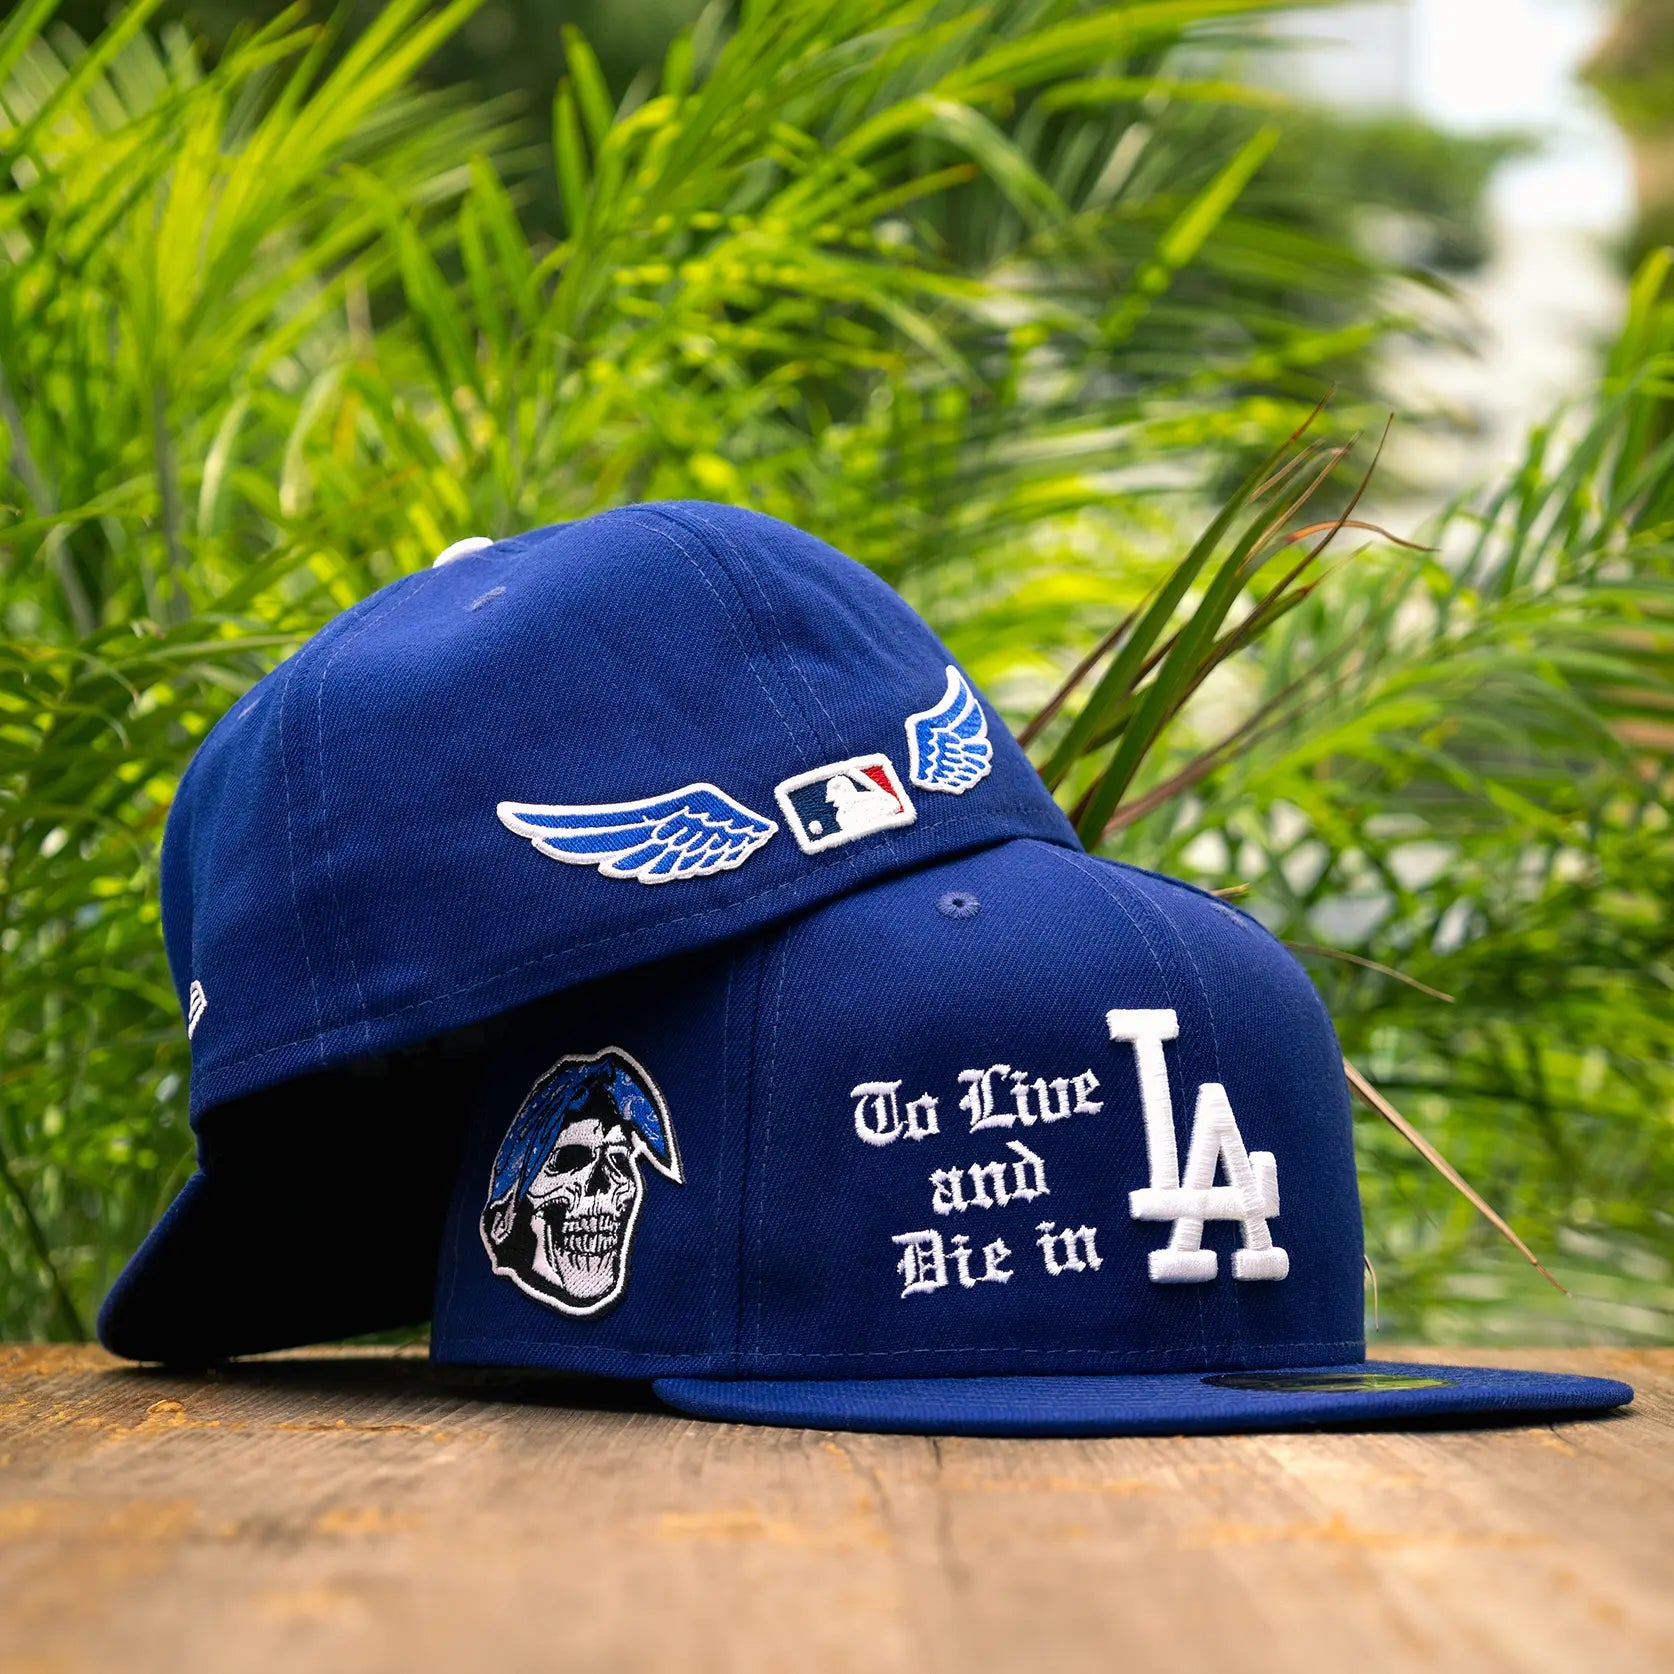 Limited Edition Custom Los Angeles Dodgers Hat To Live And